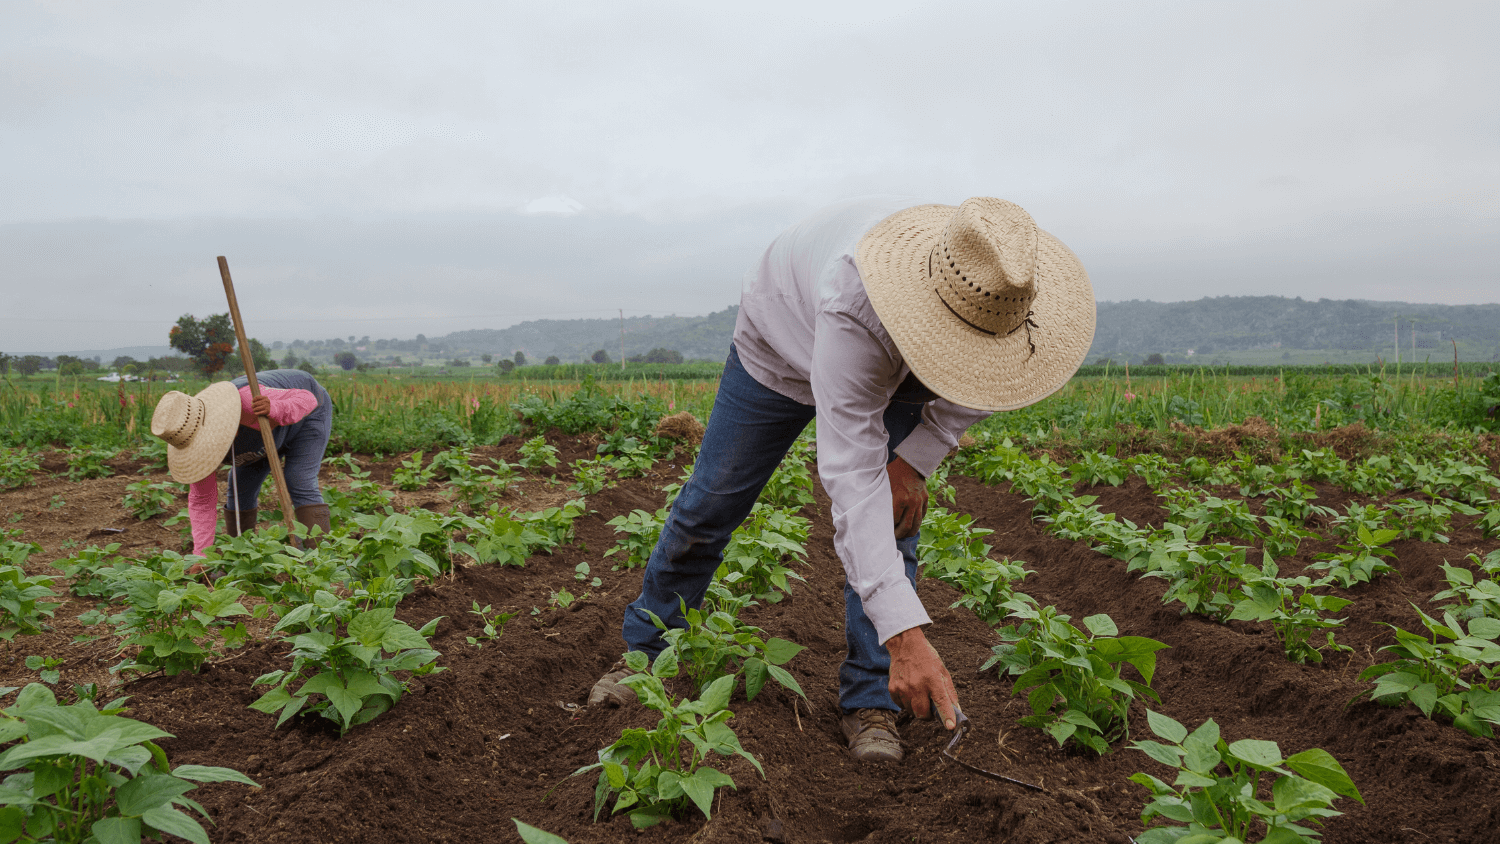 Two farmworkers in a field tending to crops